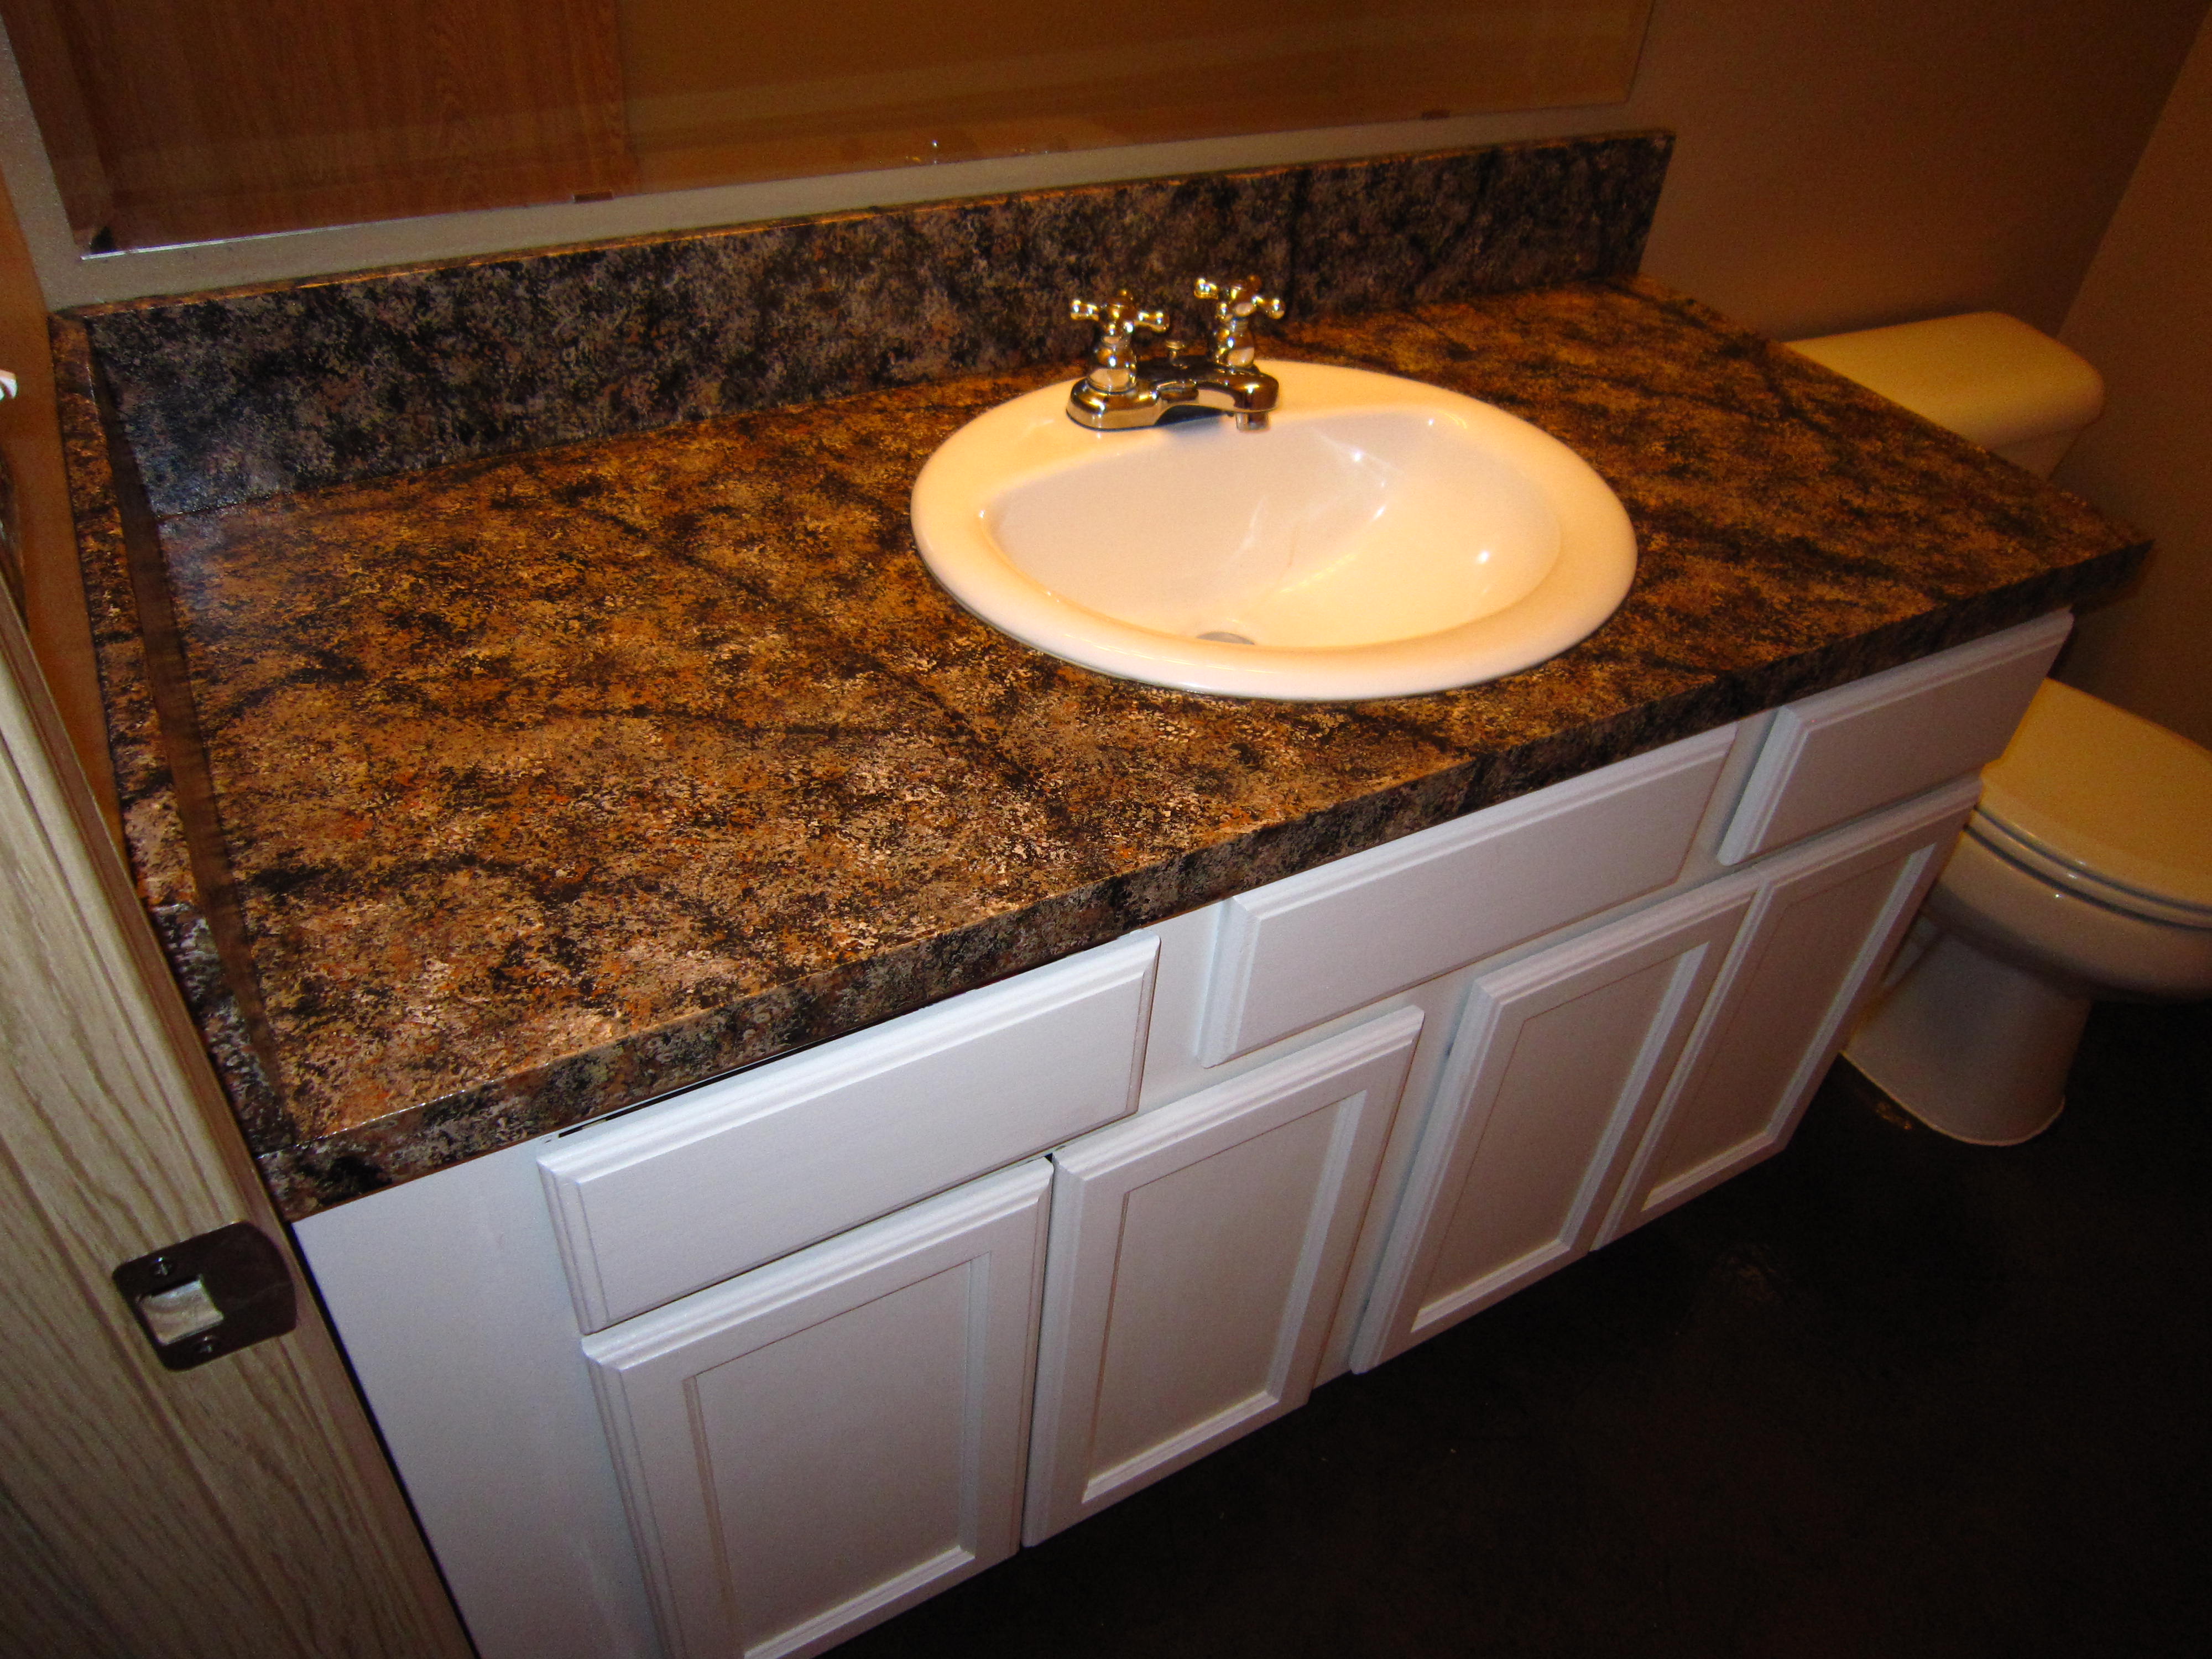 Diy Faux Granite Countertop Without A Kit For Under 60 Oooh I Could Totally Do That